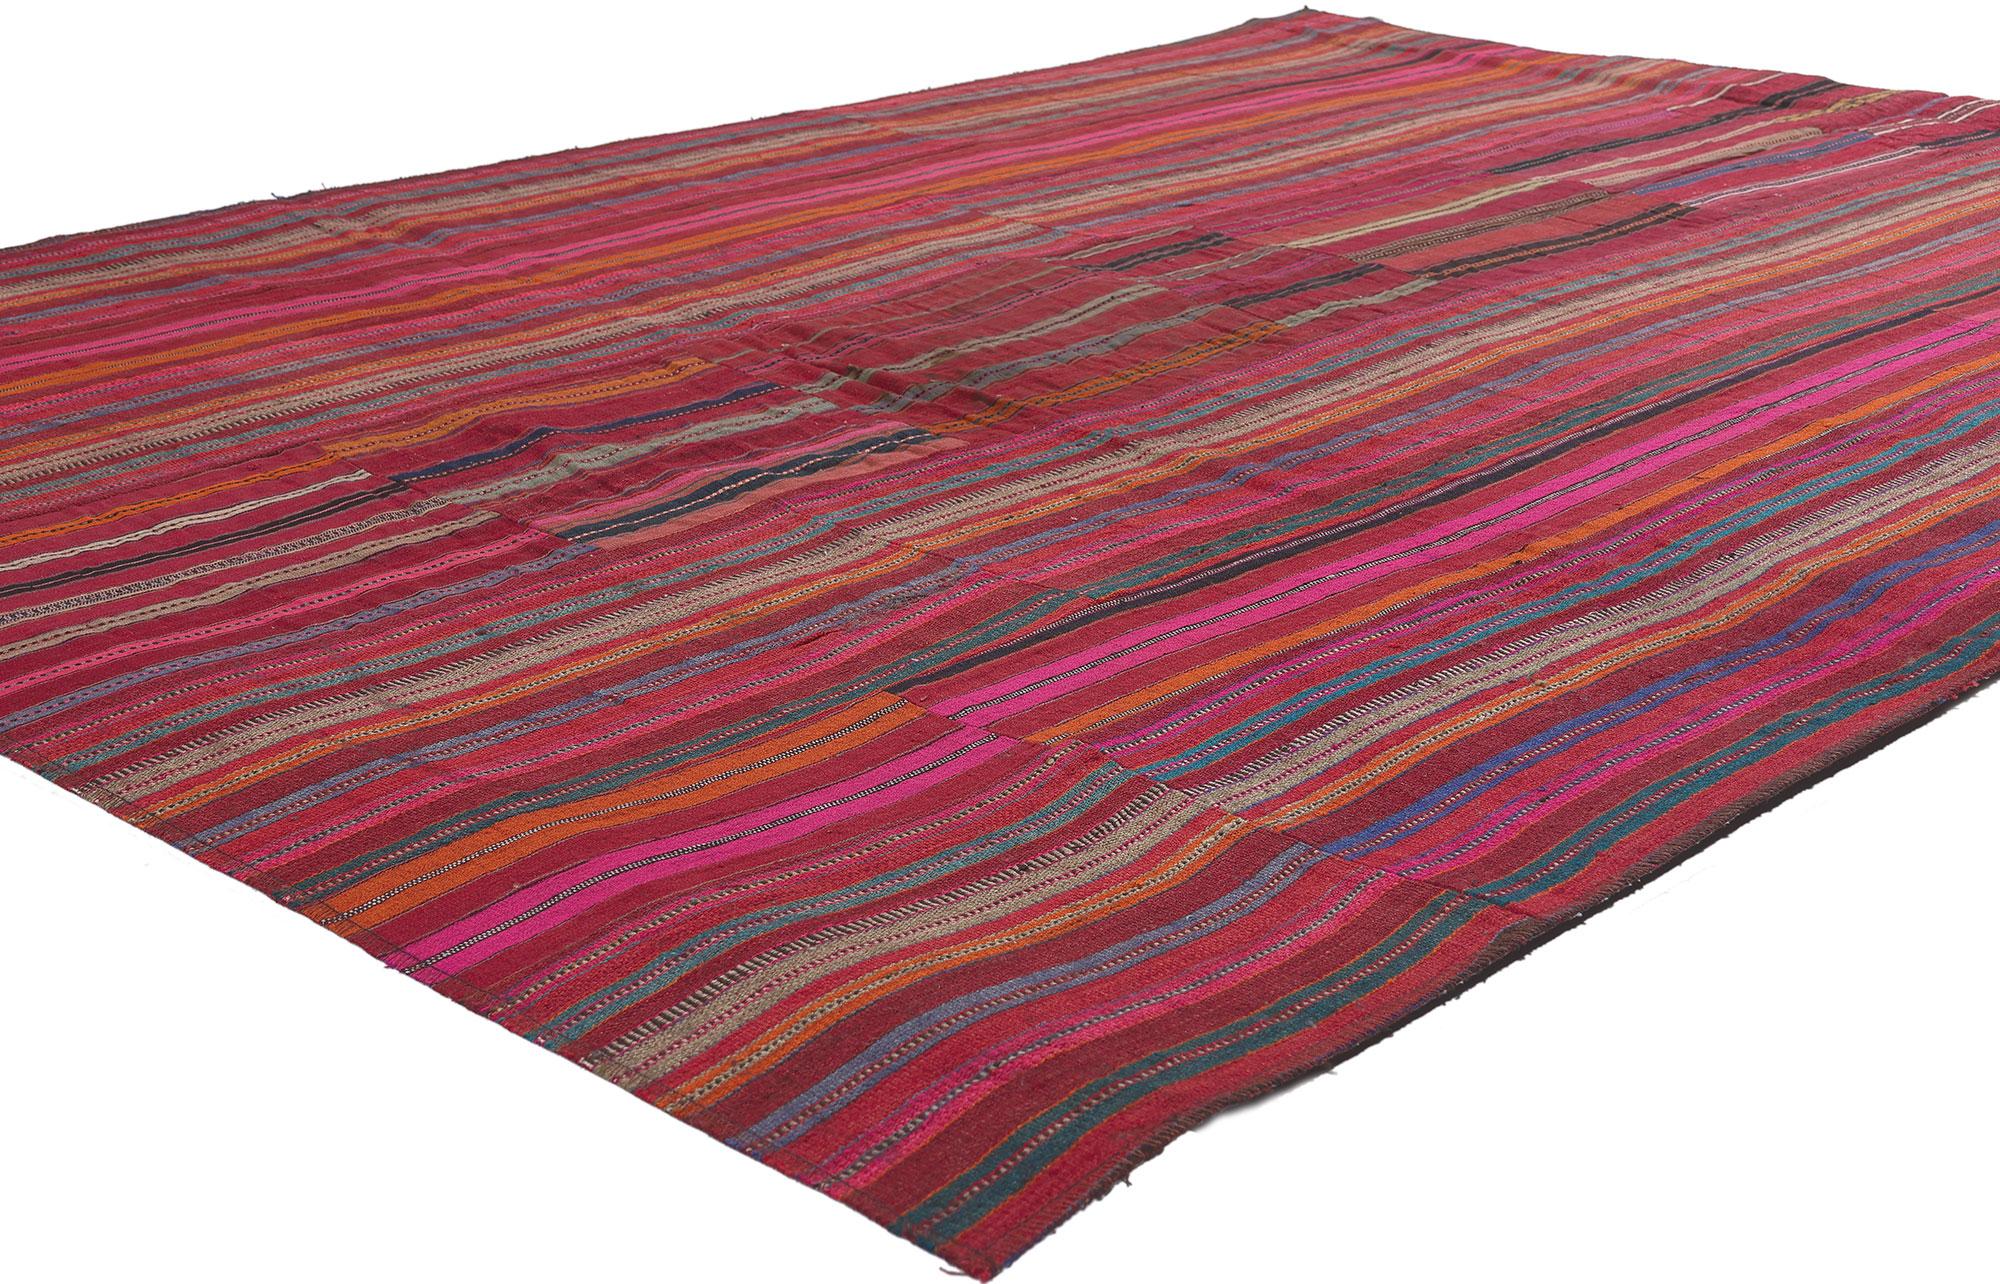 60812 Vintage Turkish Striped Kilim Rug, 05'05 x 07'06.
Weathered charm and rugged beauty collides with rustic sensibility in this handwoven wool vintage Turkish kilim rug. The striped panel design and lively colors woven into this piece work